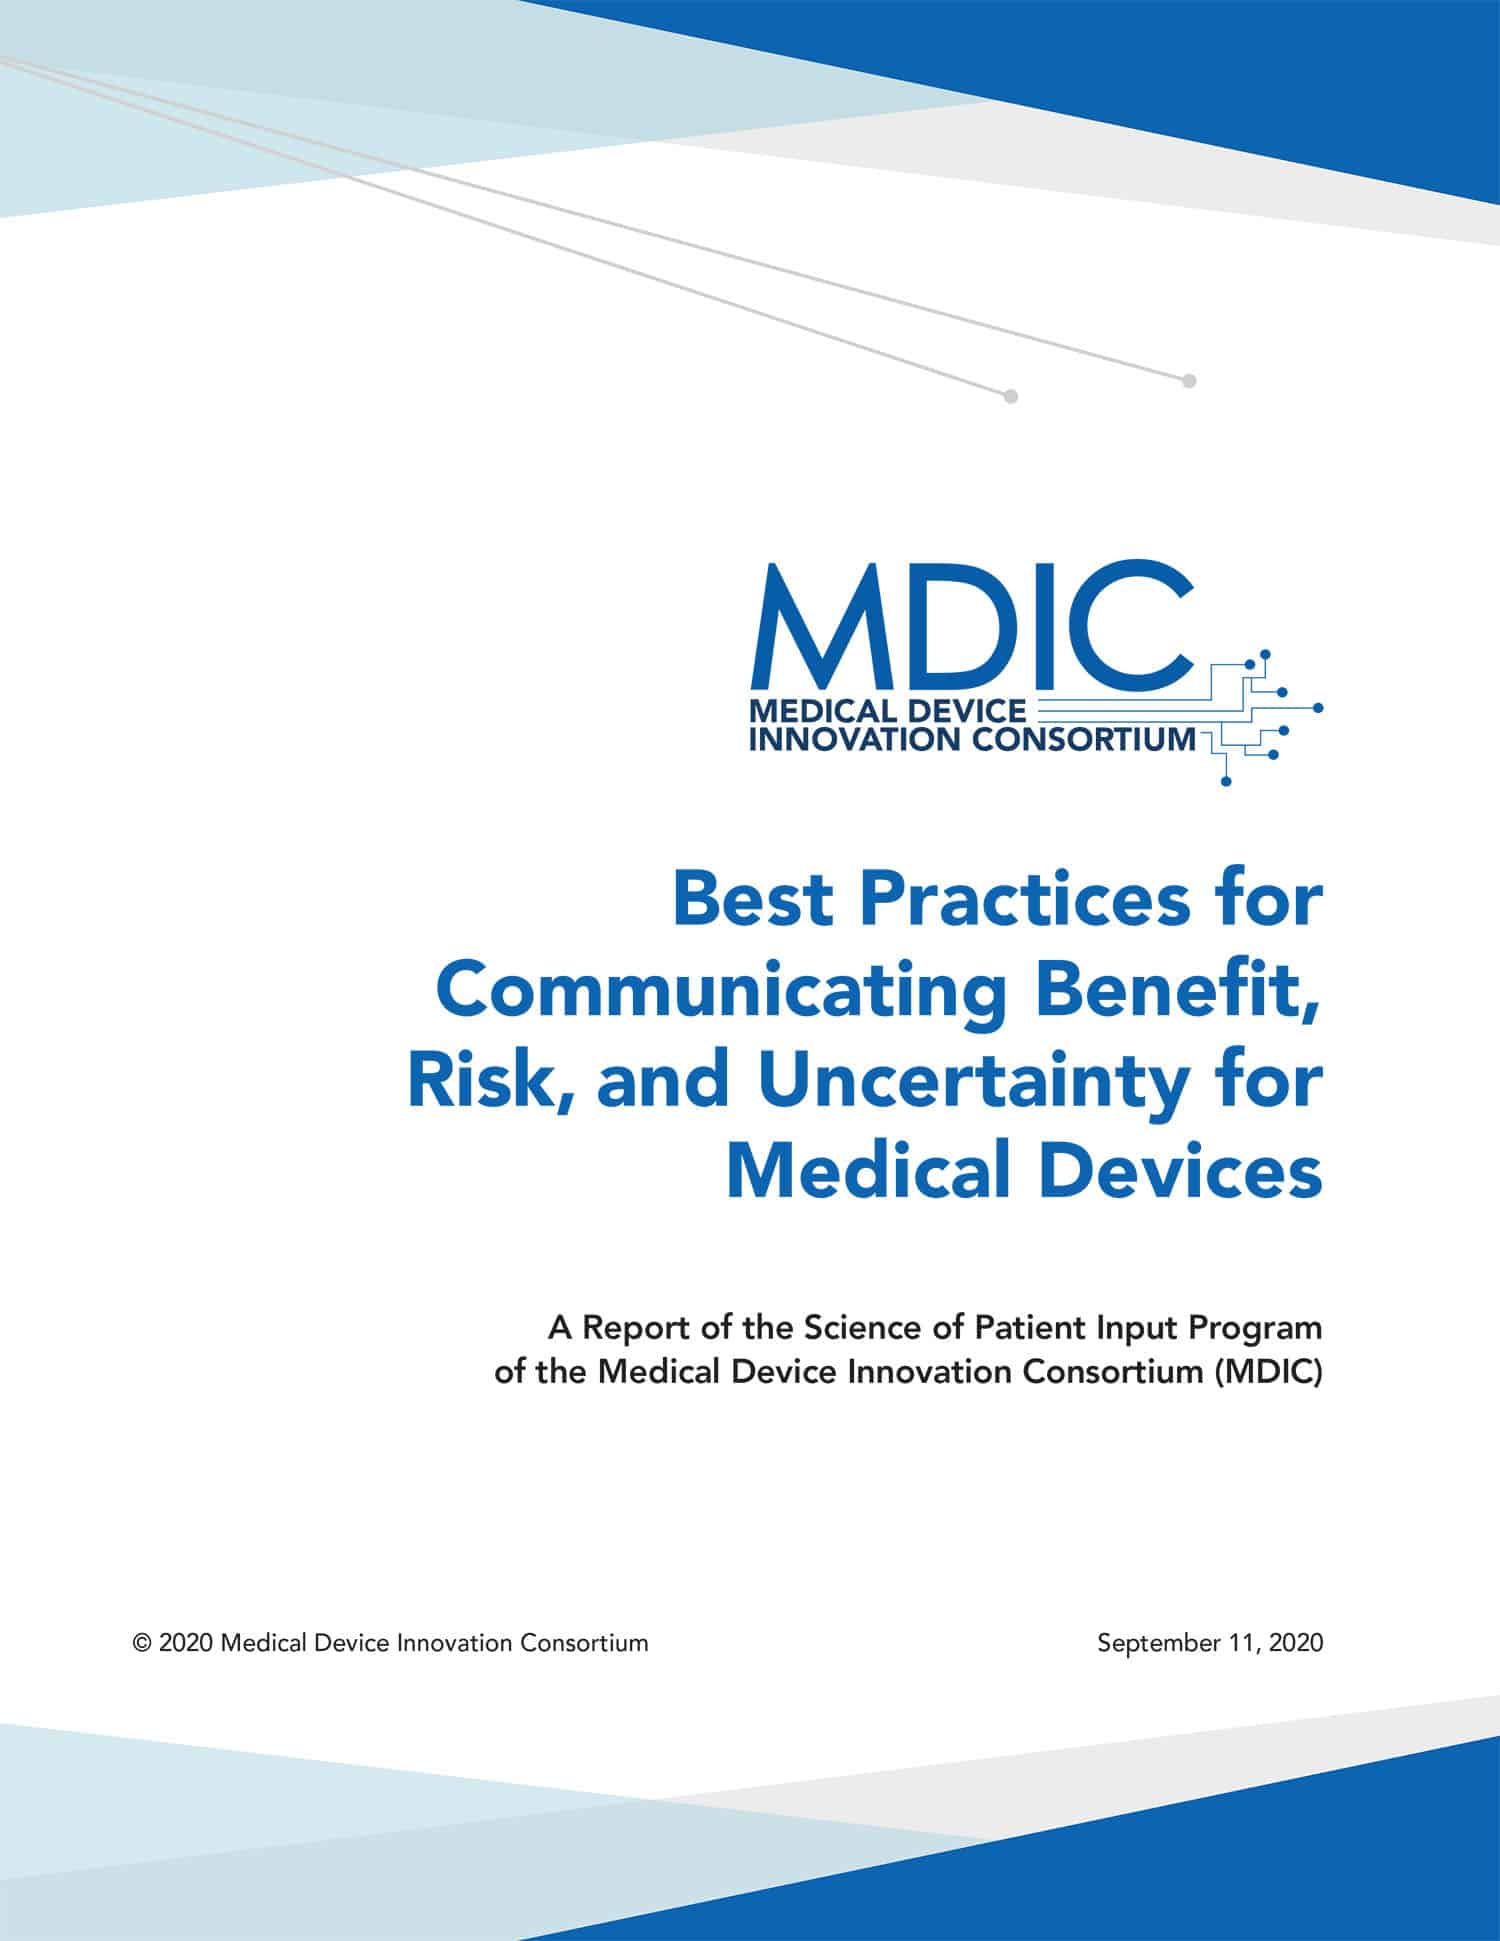 Best Practices for Communicating Benefit, Risk, and Uncertainty for Medical Devices Report